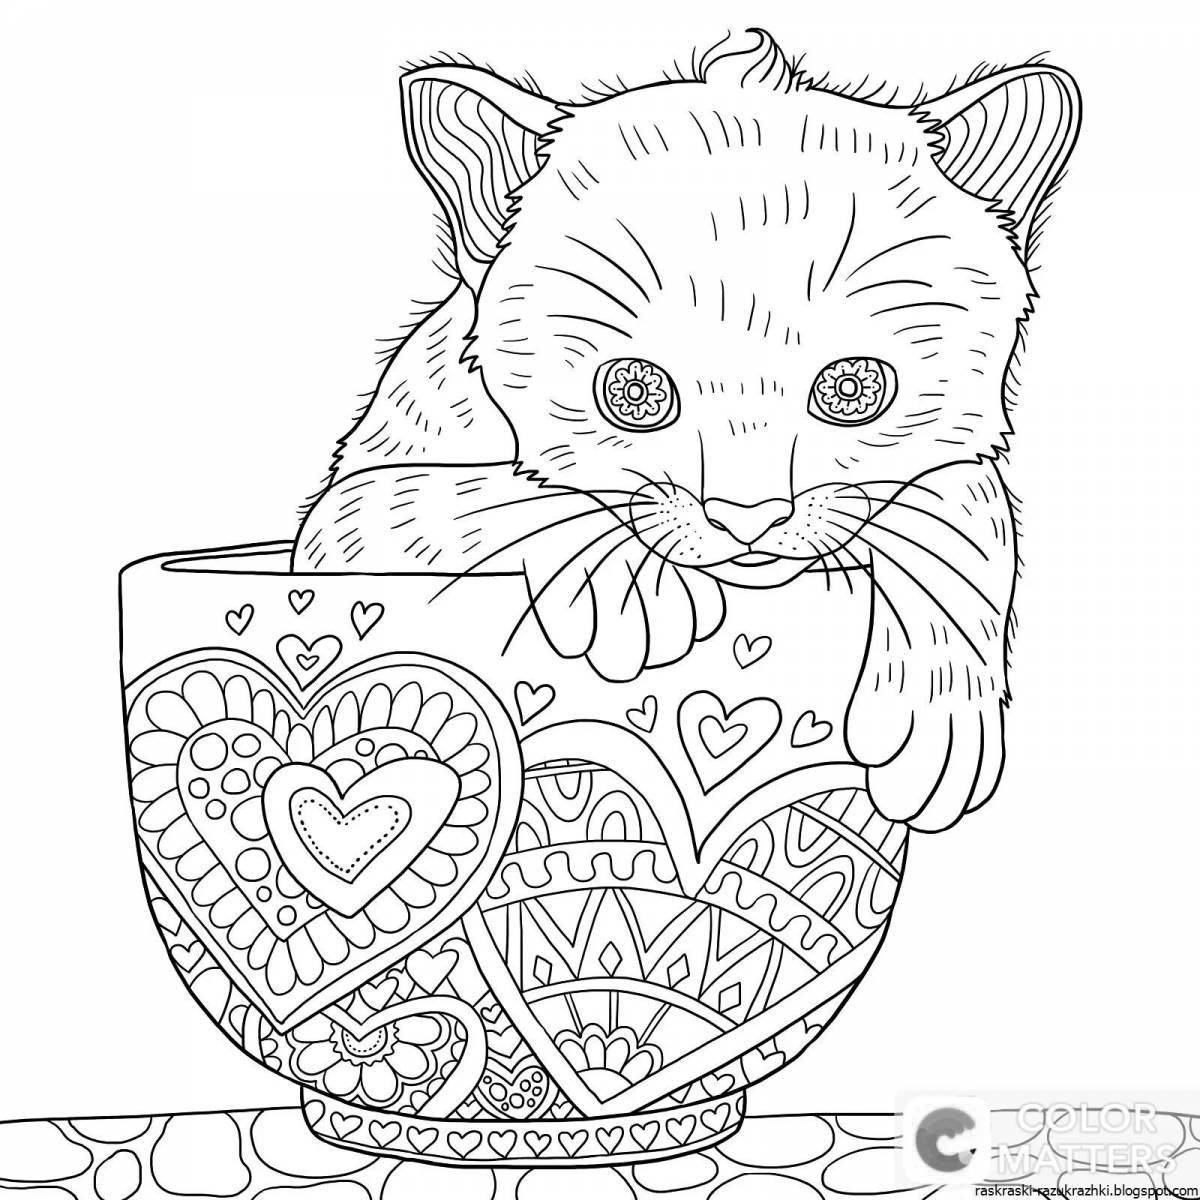 Cute coloring pages for girls 11 years old animals